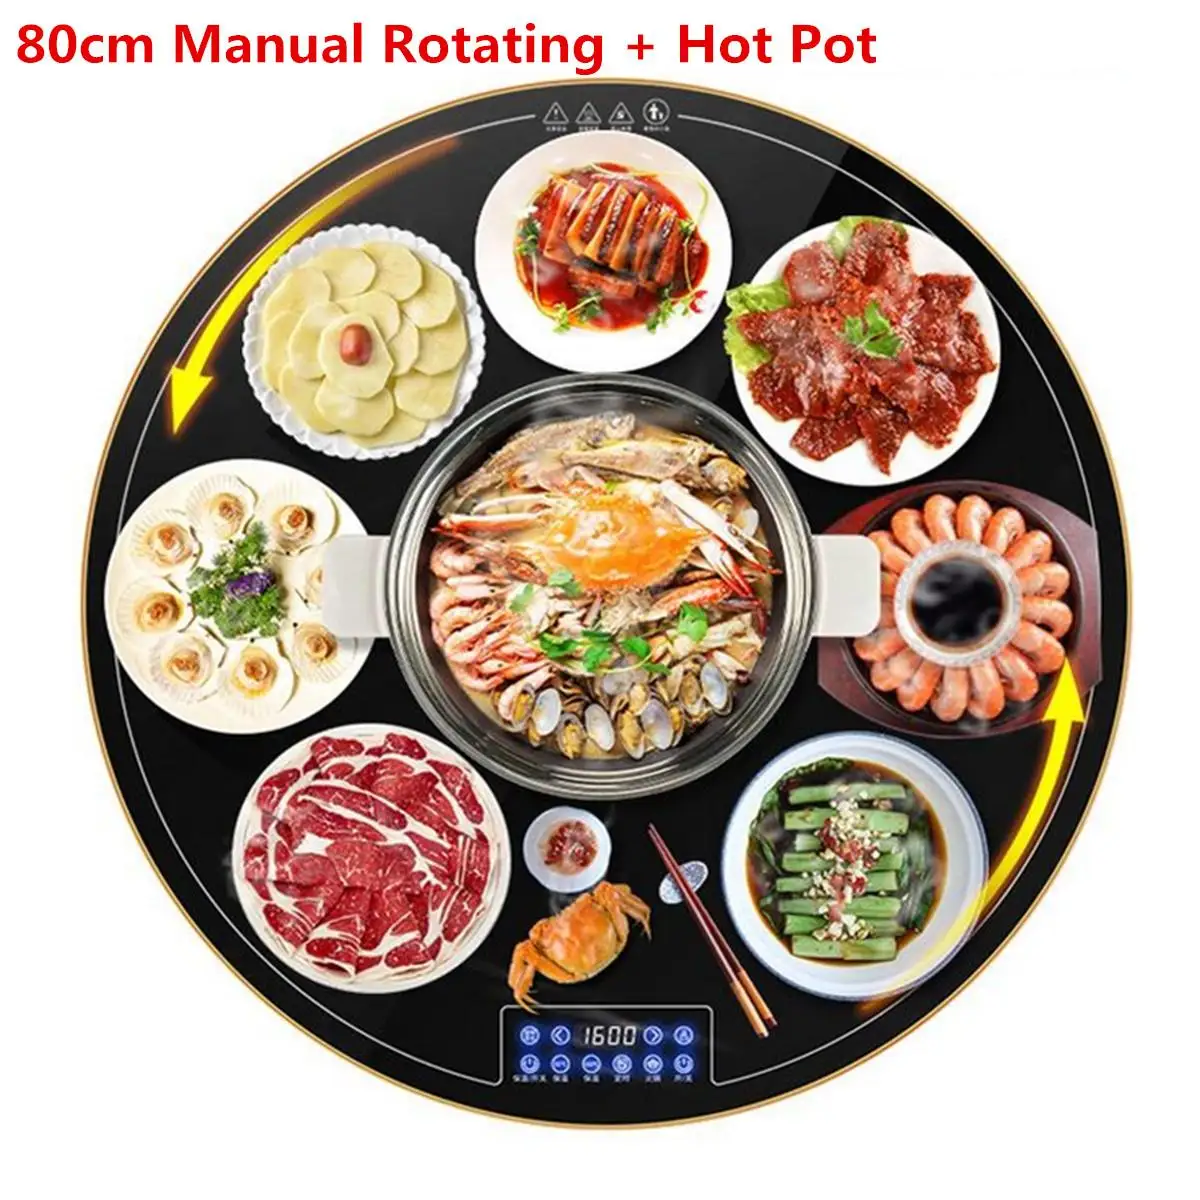 Hot Pot Household Multi-functional Hot Meals Insulation Board Dish Machine Heating Board Intelligent Heating Food Hot Food Table - Цвет: 80cm Manual Rotating